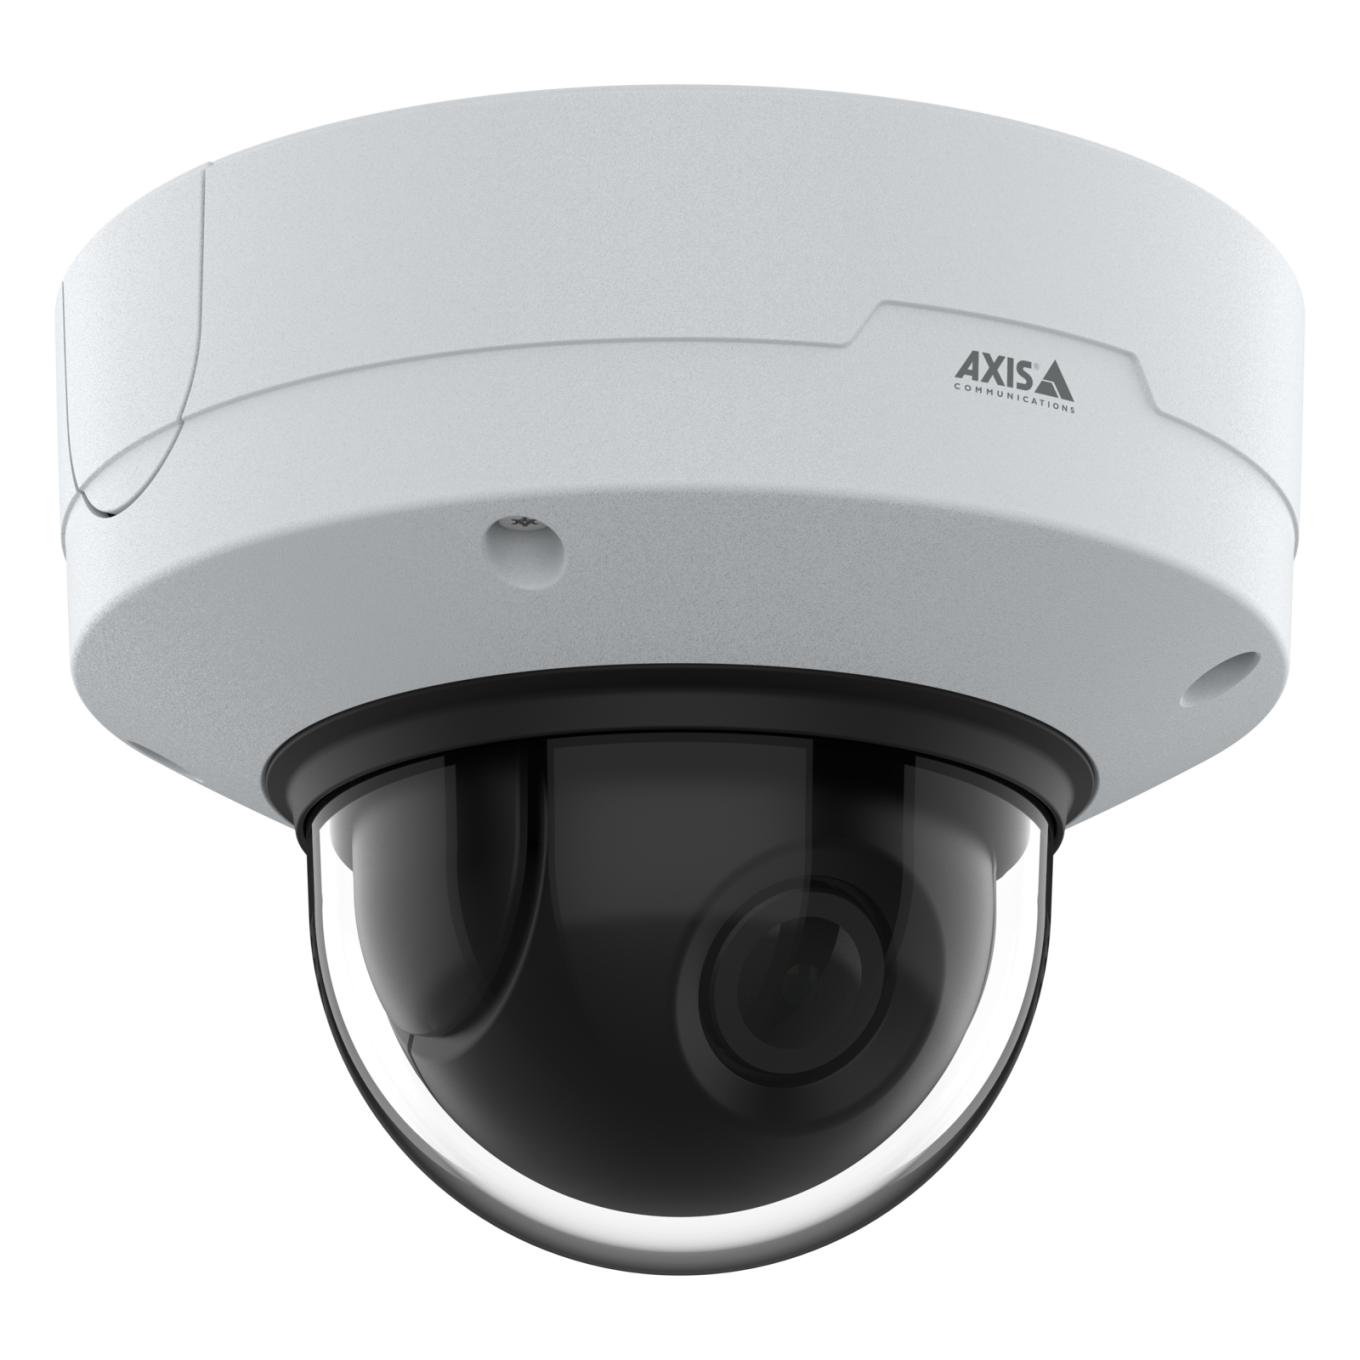 AXIS Q3626-VE Dome Camera